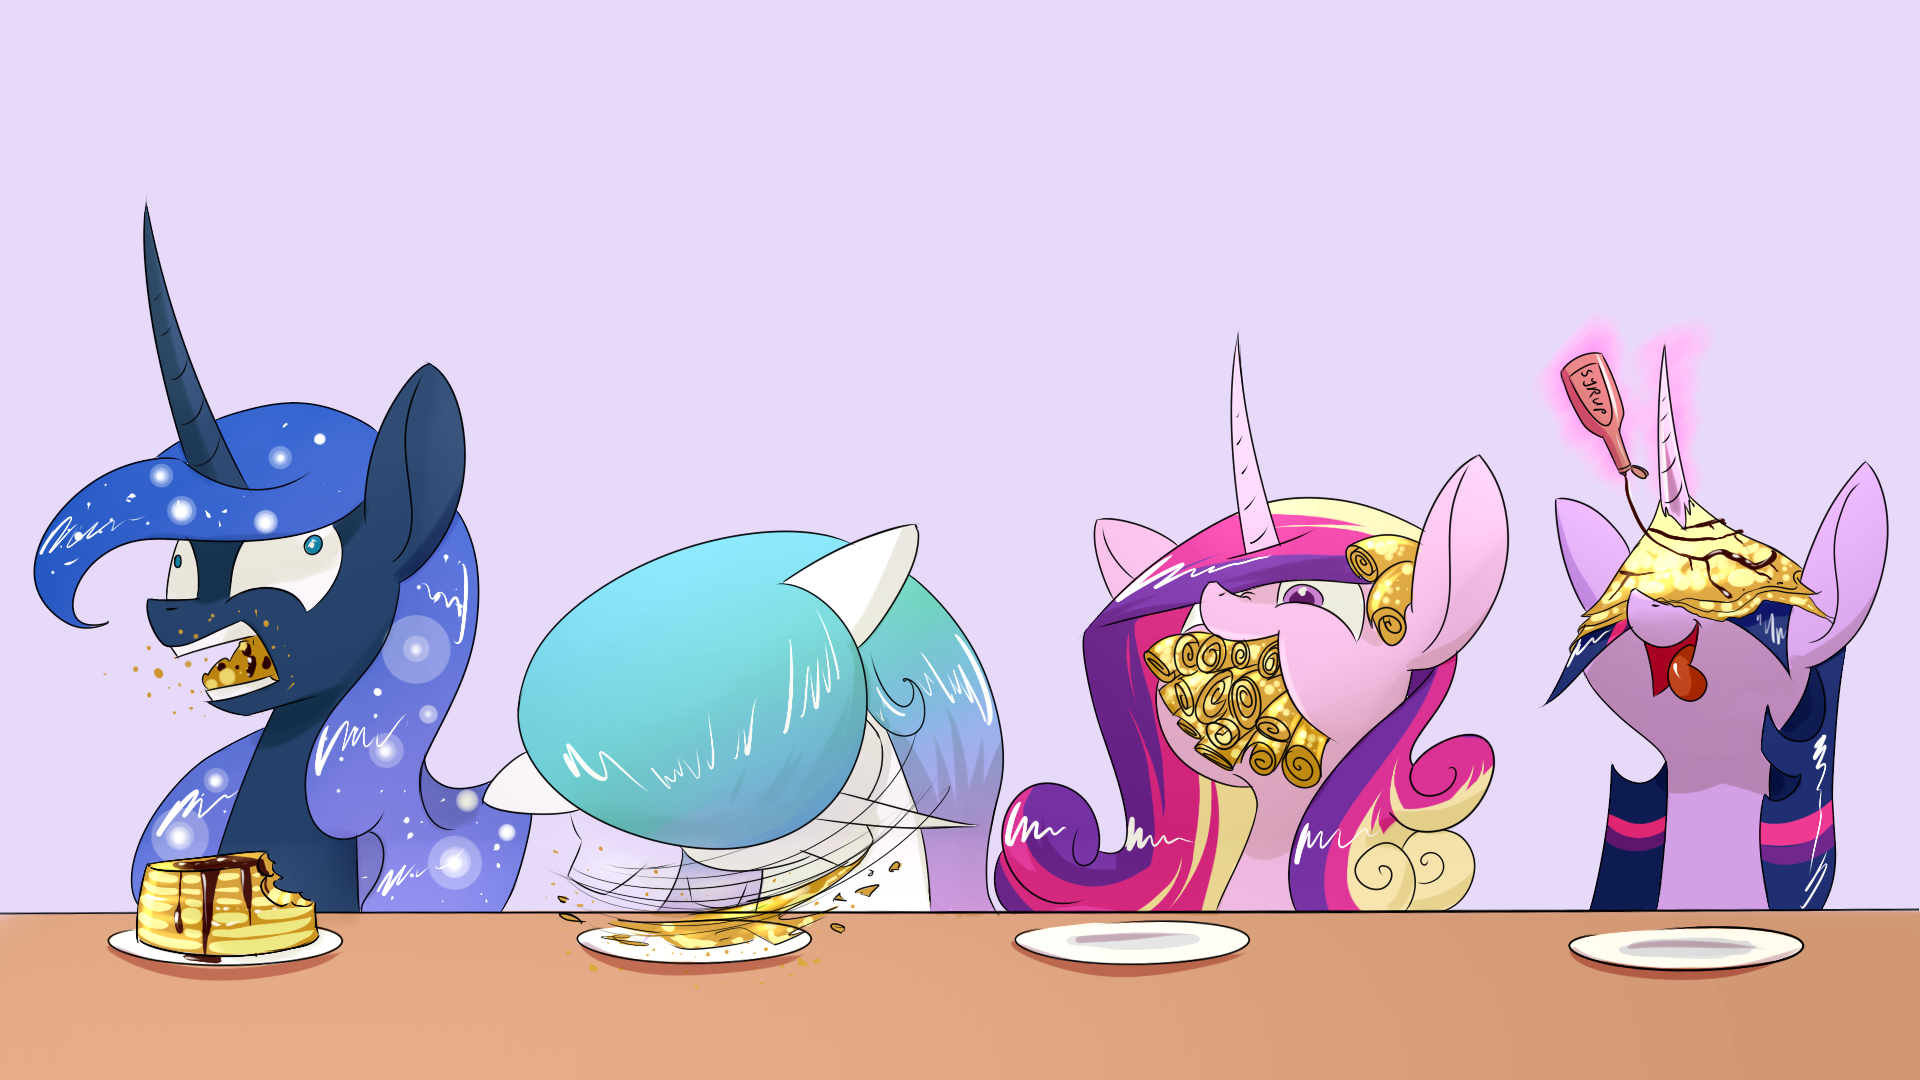 Pancakes by Underpable